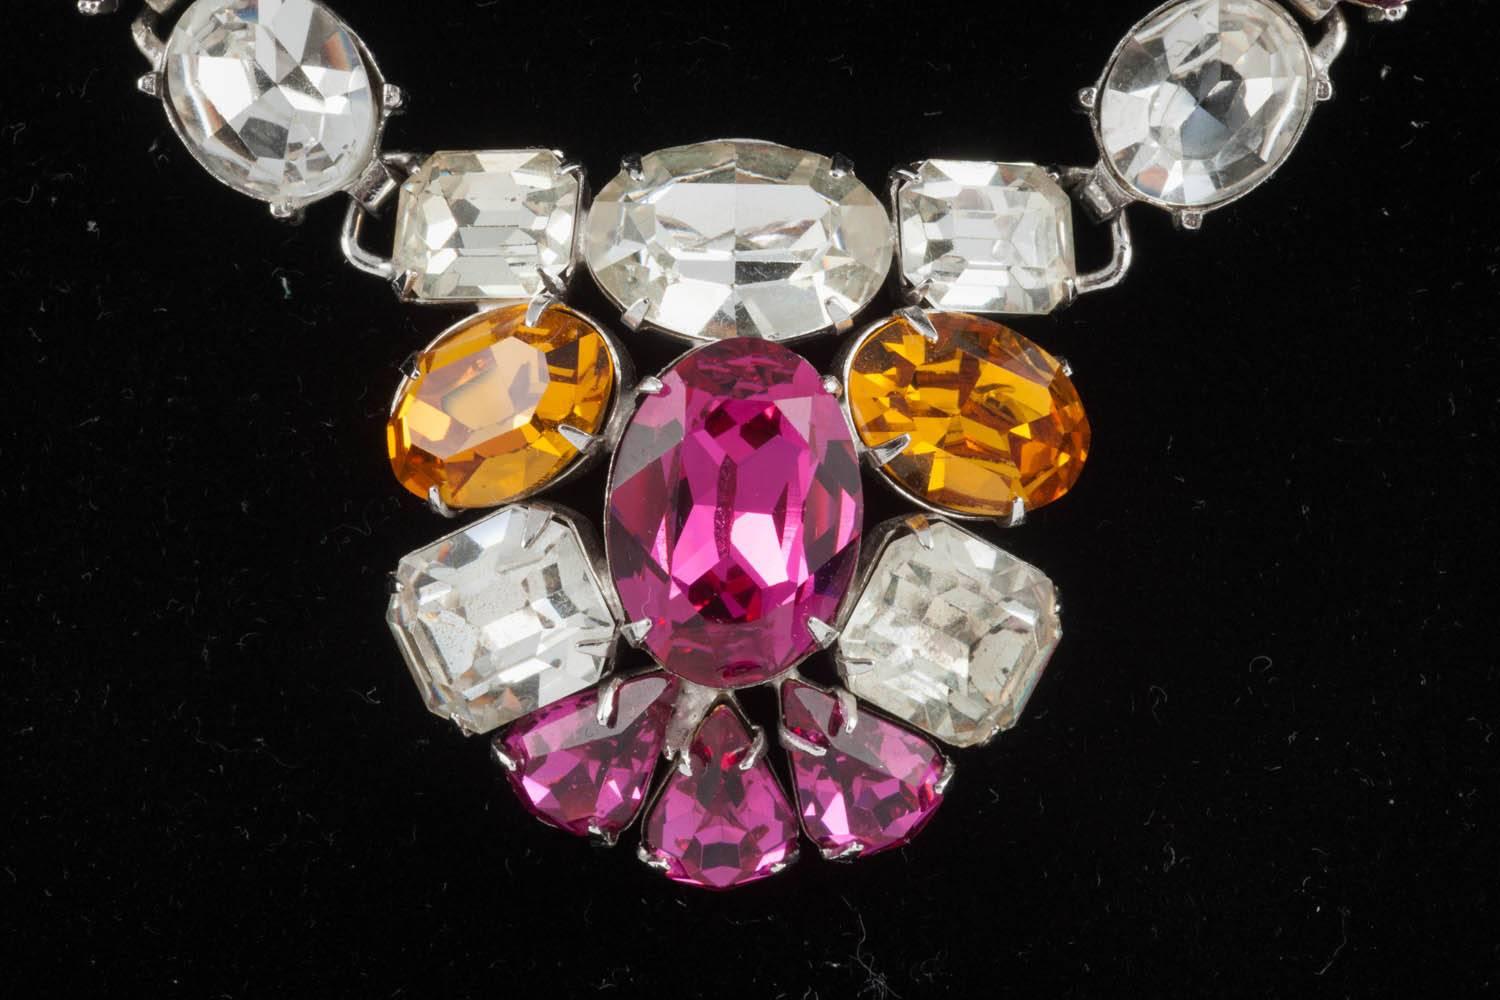 A very pretty necklace in a really unusual and beautiful colour combination of clear, deep pink and topaz/deep citrine pastes of varying shapes and sizes, all set in a white metal setting.
There is something very striking and attractive in this